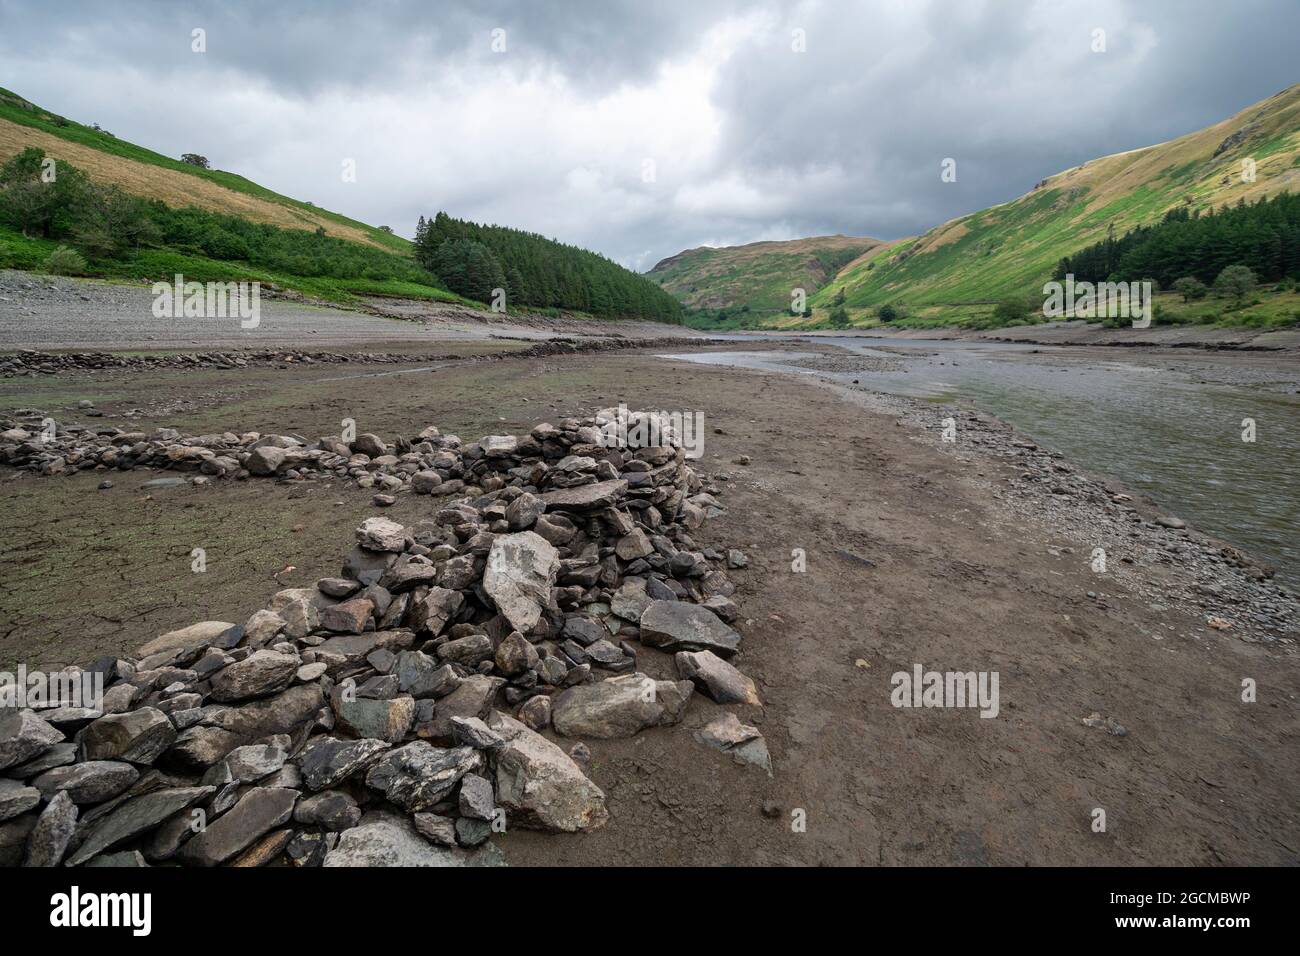 The dry lake bed of the Haweswater reservoir in the English Lake District, Cumbria, showing the old field walls of Mardale Lost Village Stock Photo